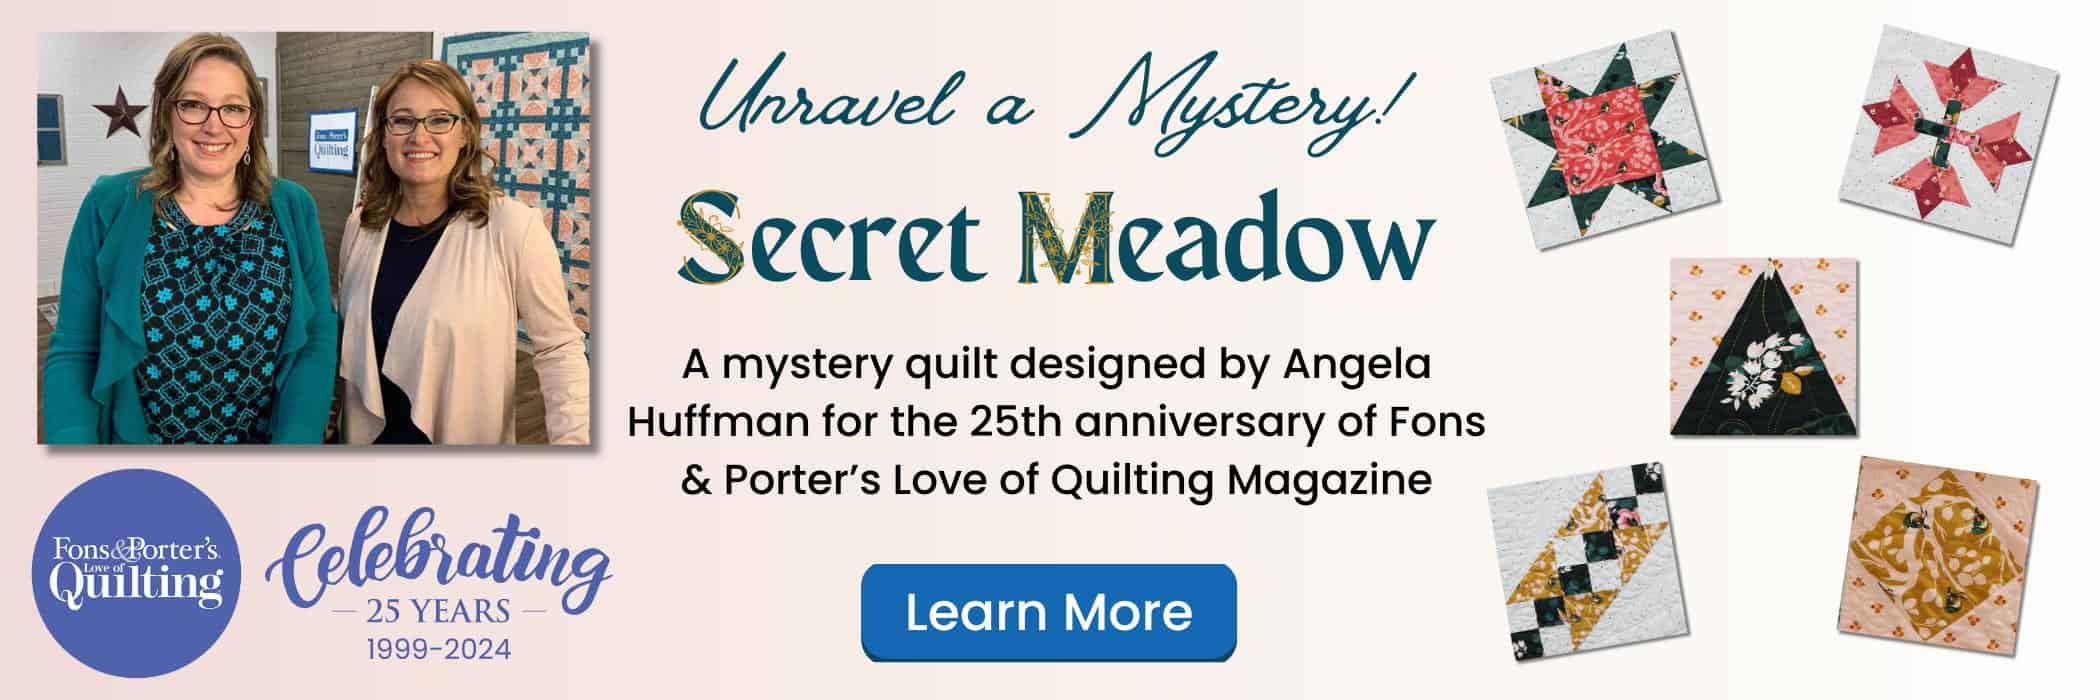 Secret Meadow: A mystery quilt designed by Angela Huffman for the 25th anniversary of Fons & Porter’s Love of QuiltingMagazine